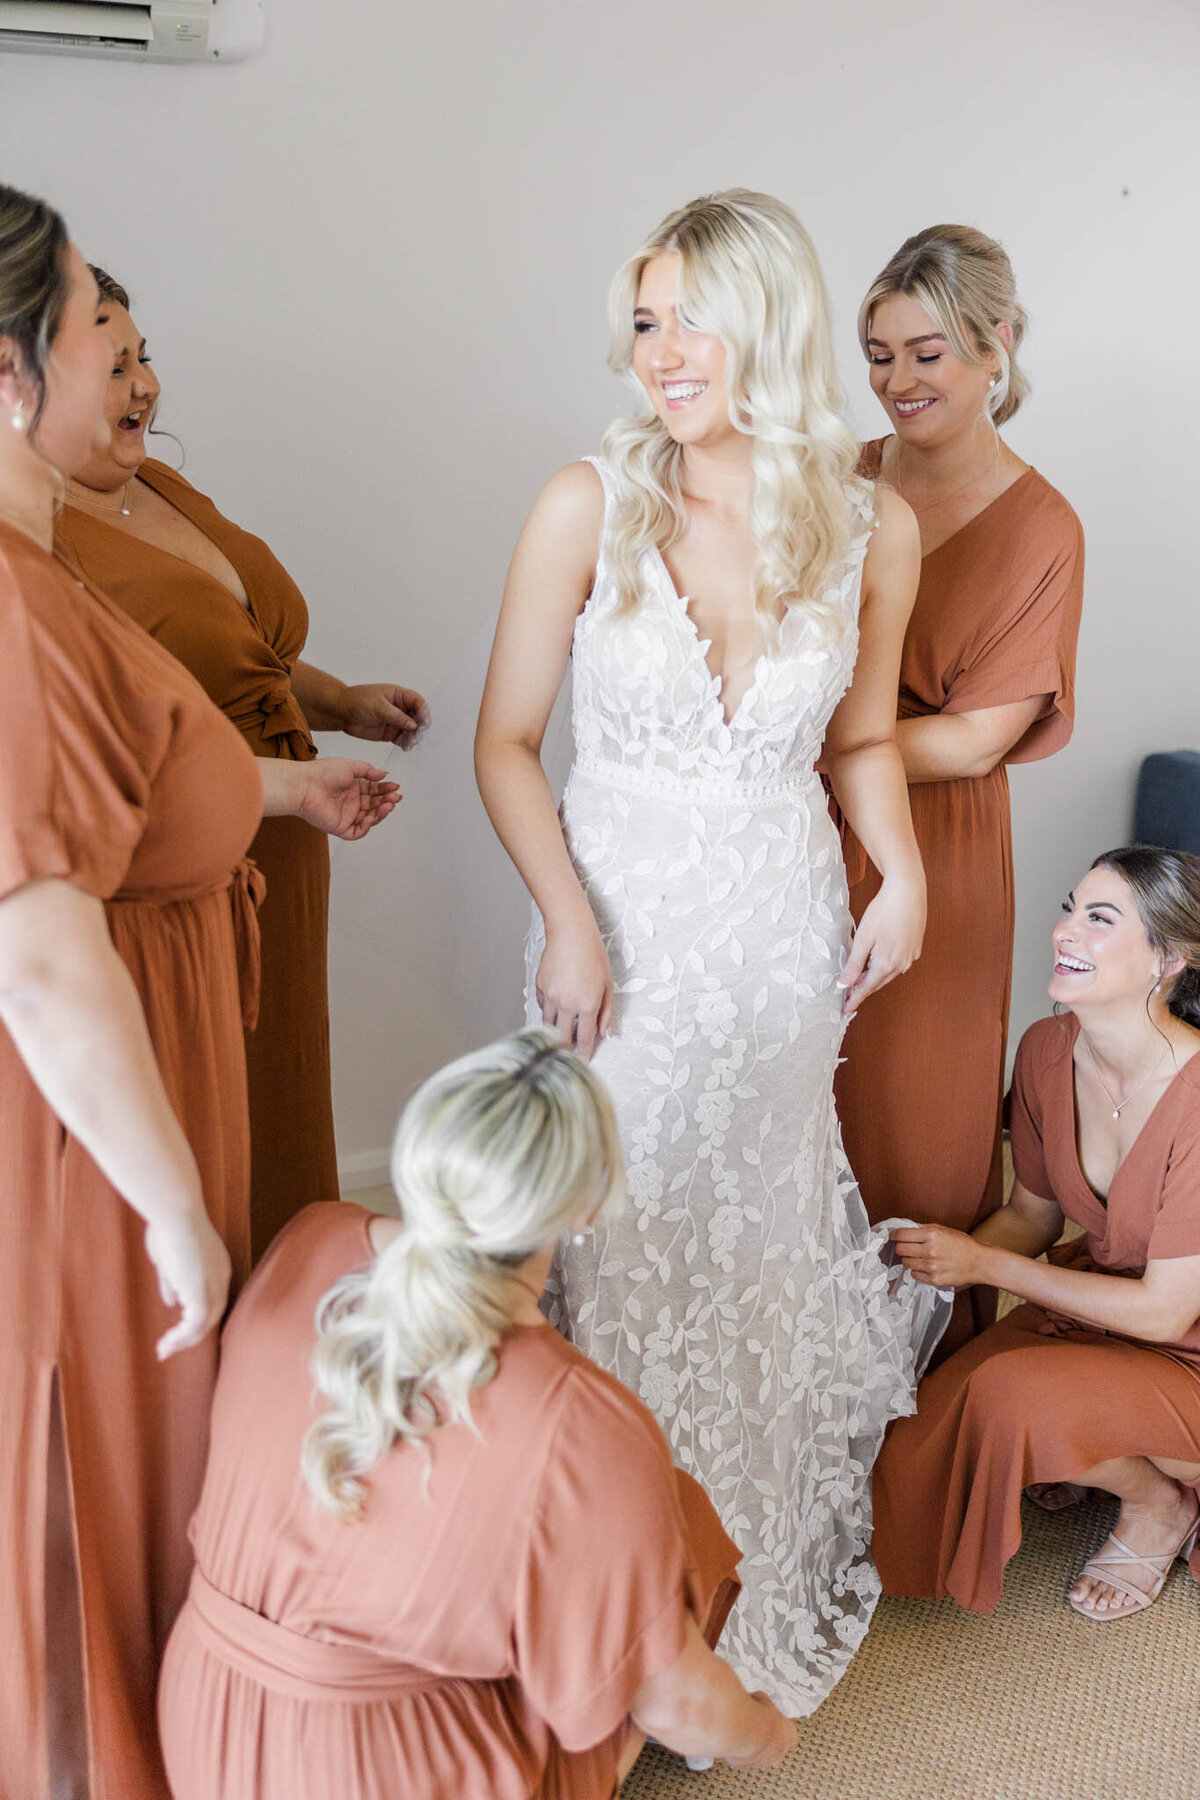 Bride, surrounded by her bridesmaids on her wedding day morning